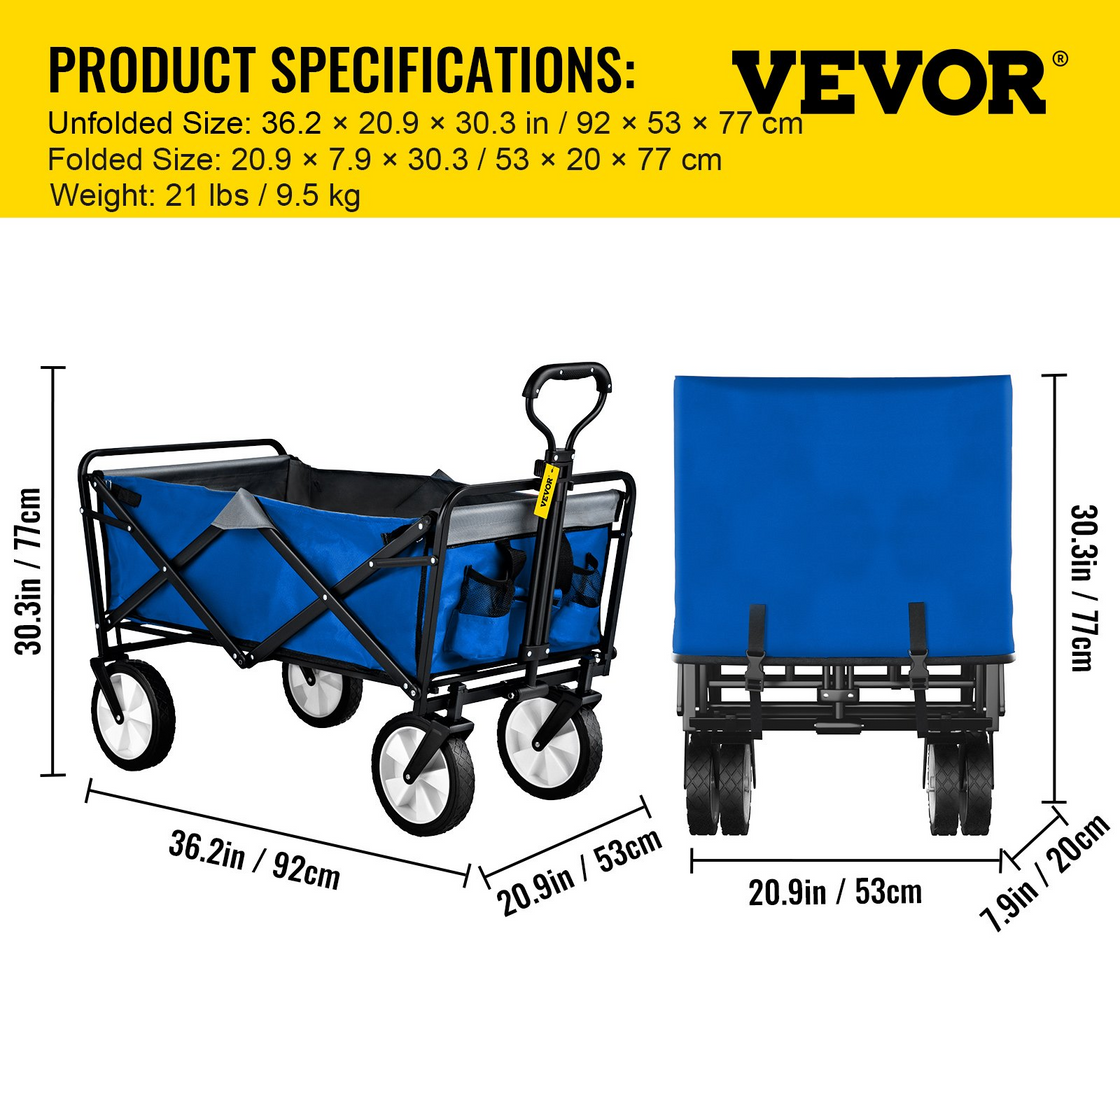 VEVOR Wagon Cart, Collapsible Folding Cart with 176lbs Load - Portable Foldable Wagons for Beach, Camping, and Grocery